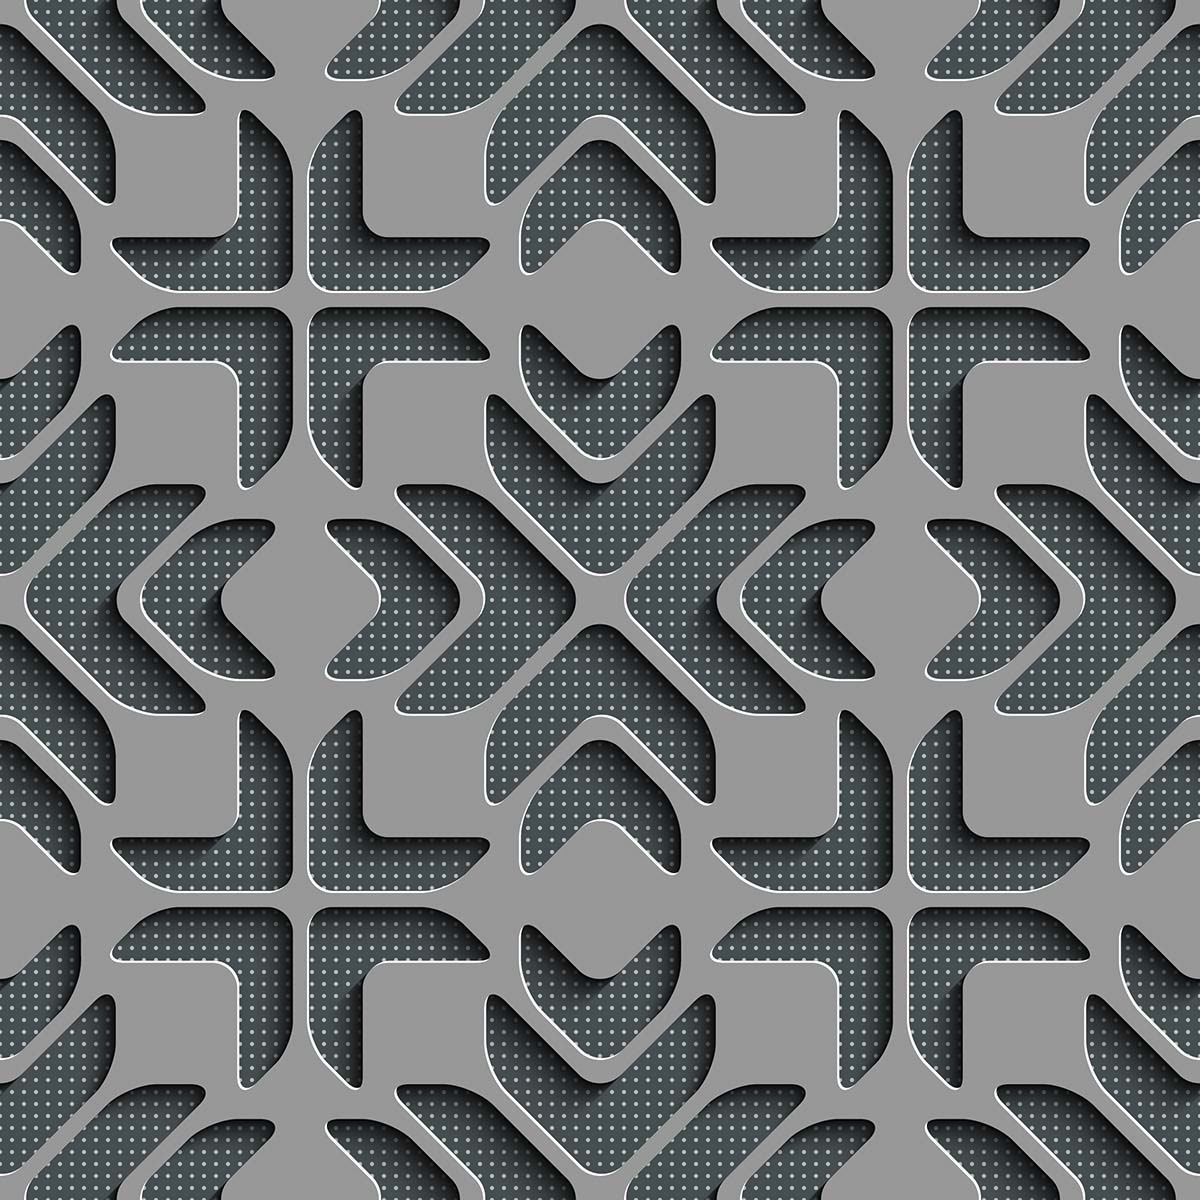 A grey and white pattern